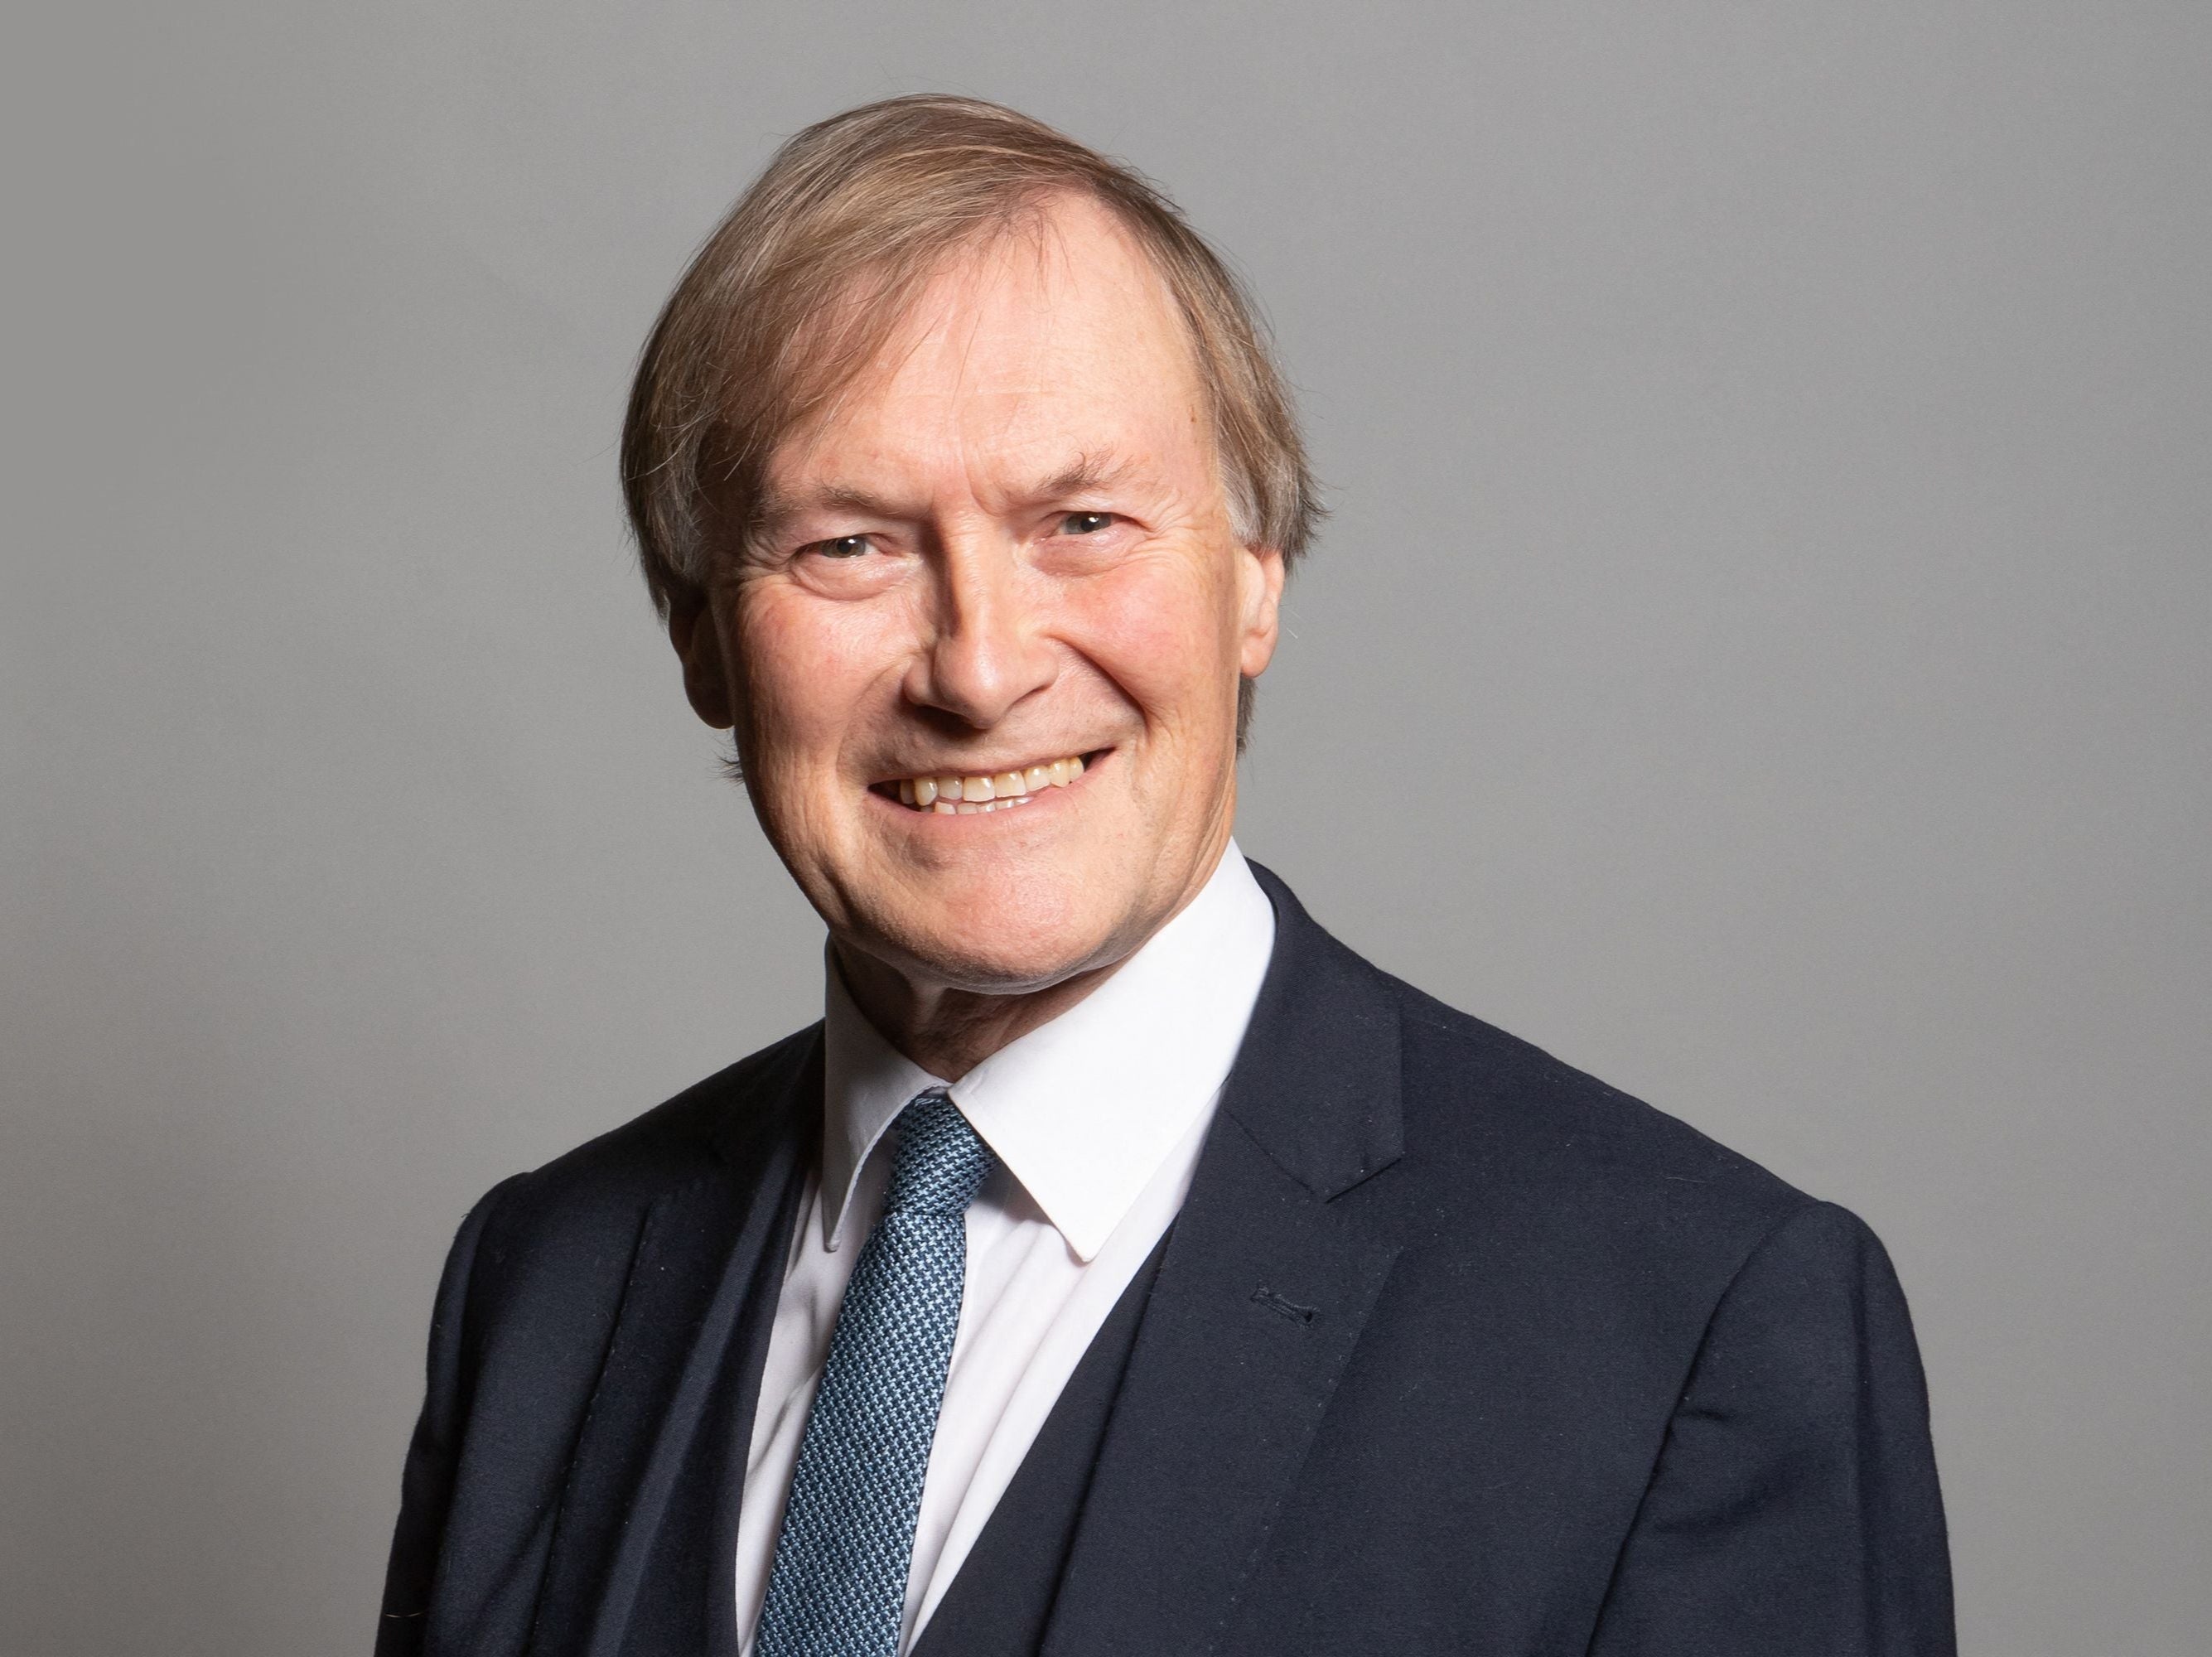 Conservation MP Sir David Amess died after being stabbed during a constituency surgery in Leigh-on-Sea, Essex